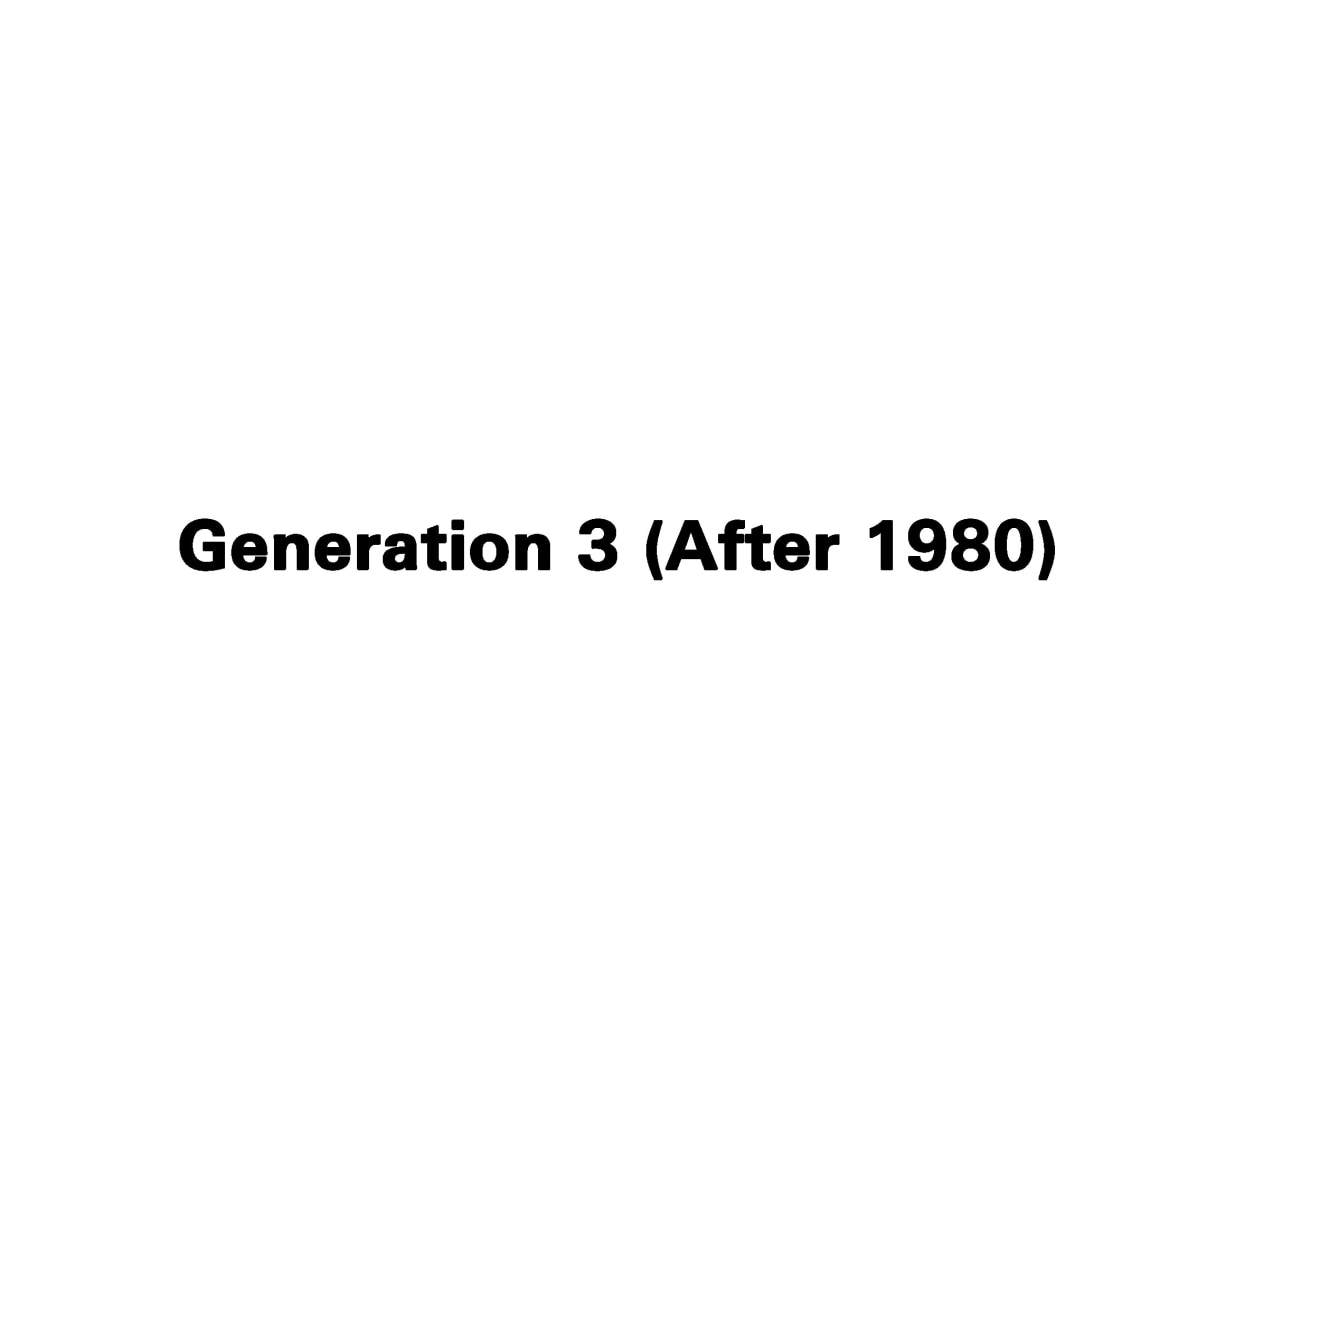 Generation 3 (After 1980)